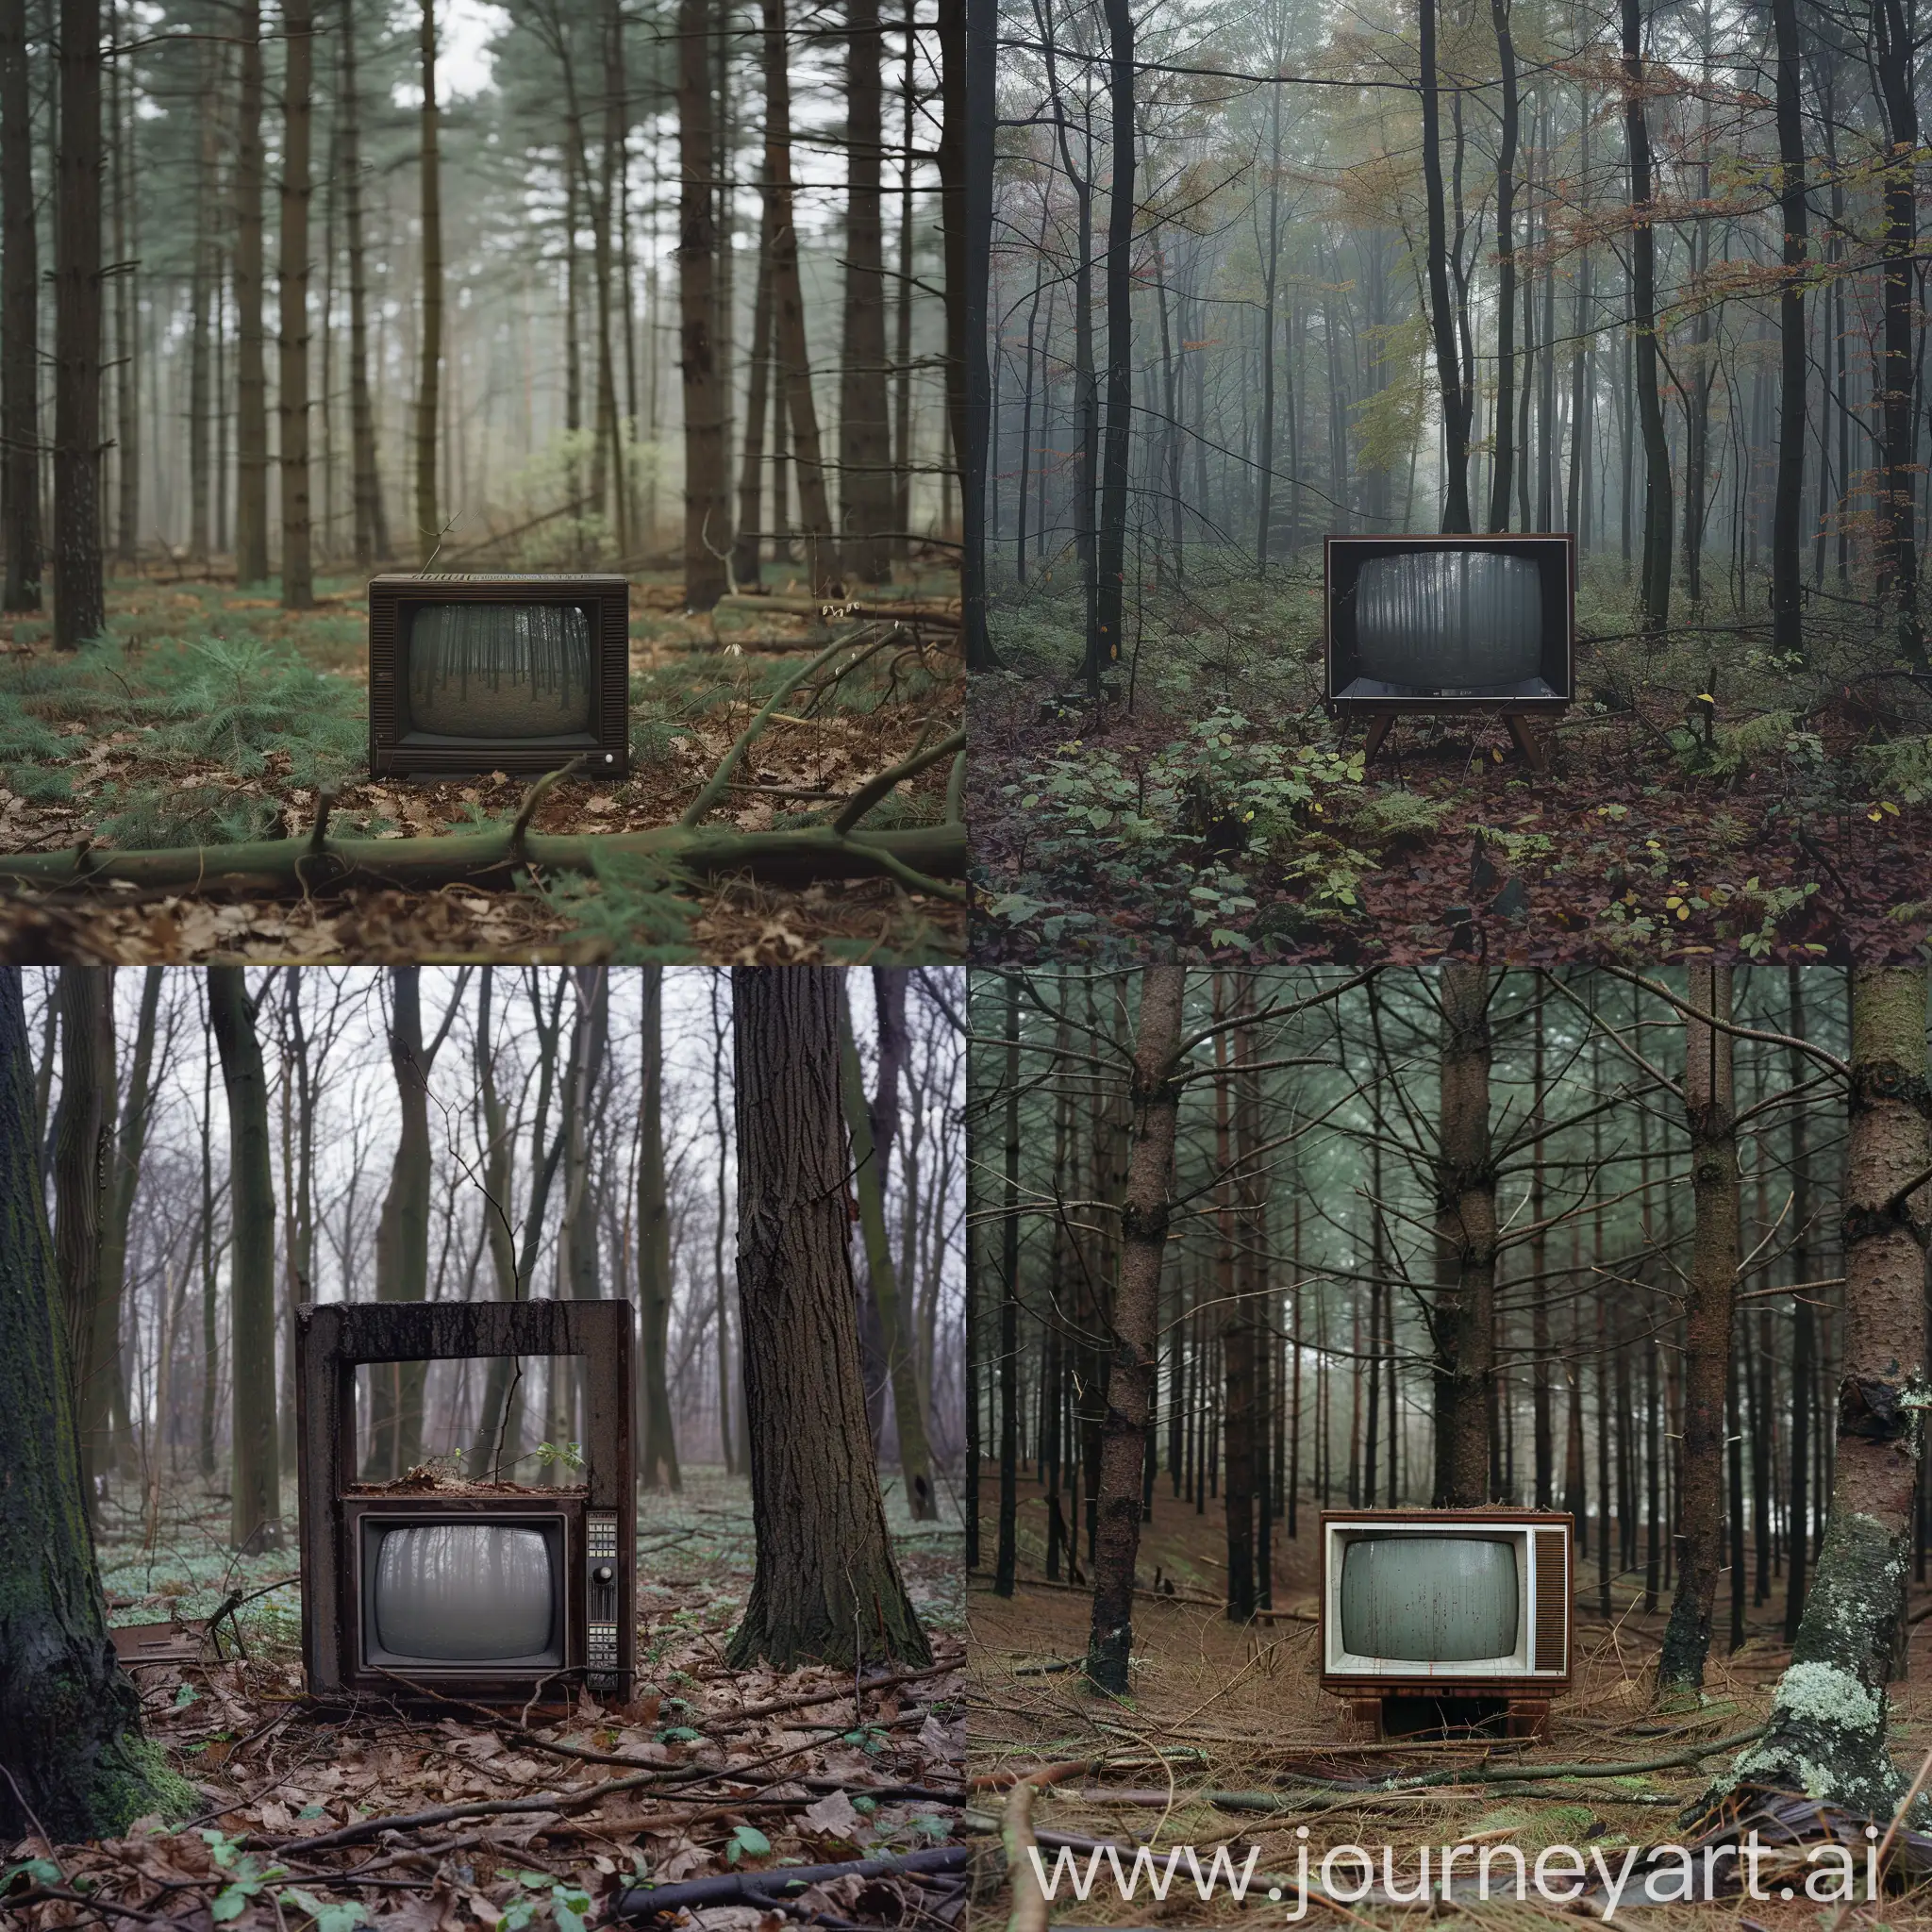 Empty-Television-in-a-Forest-Setting